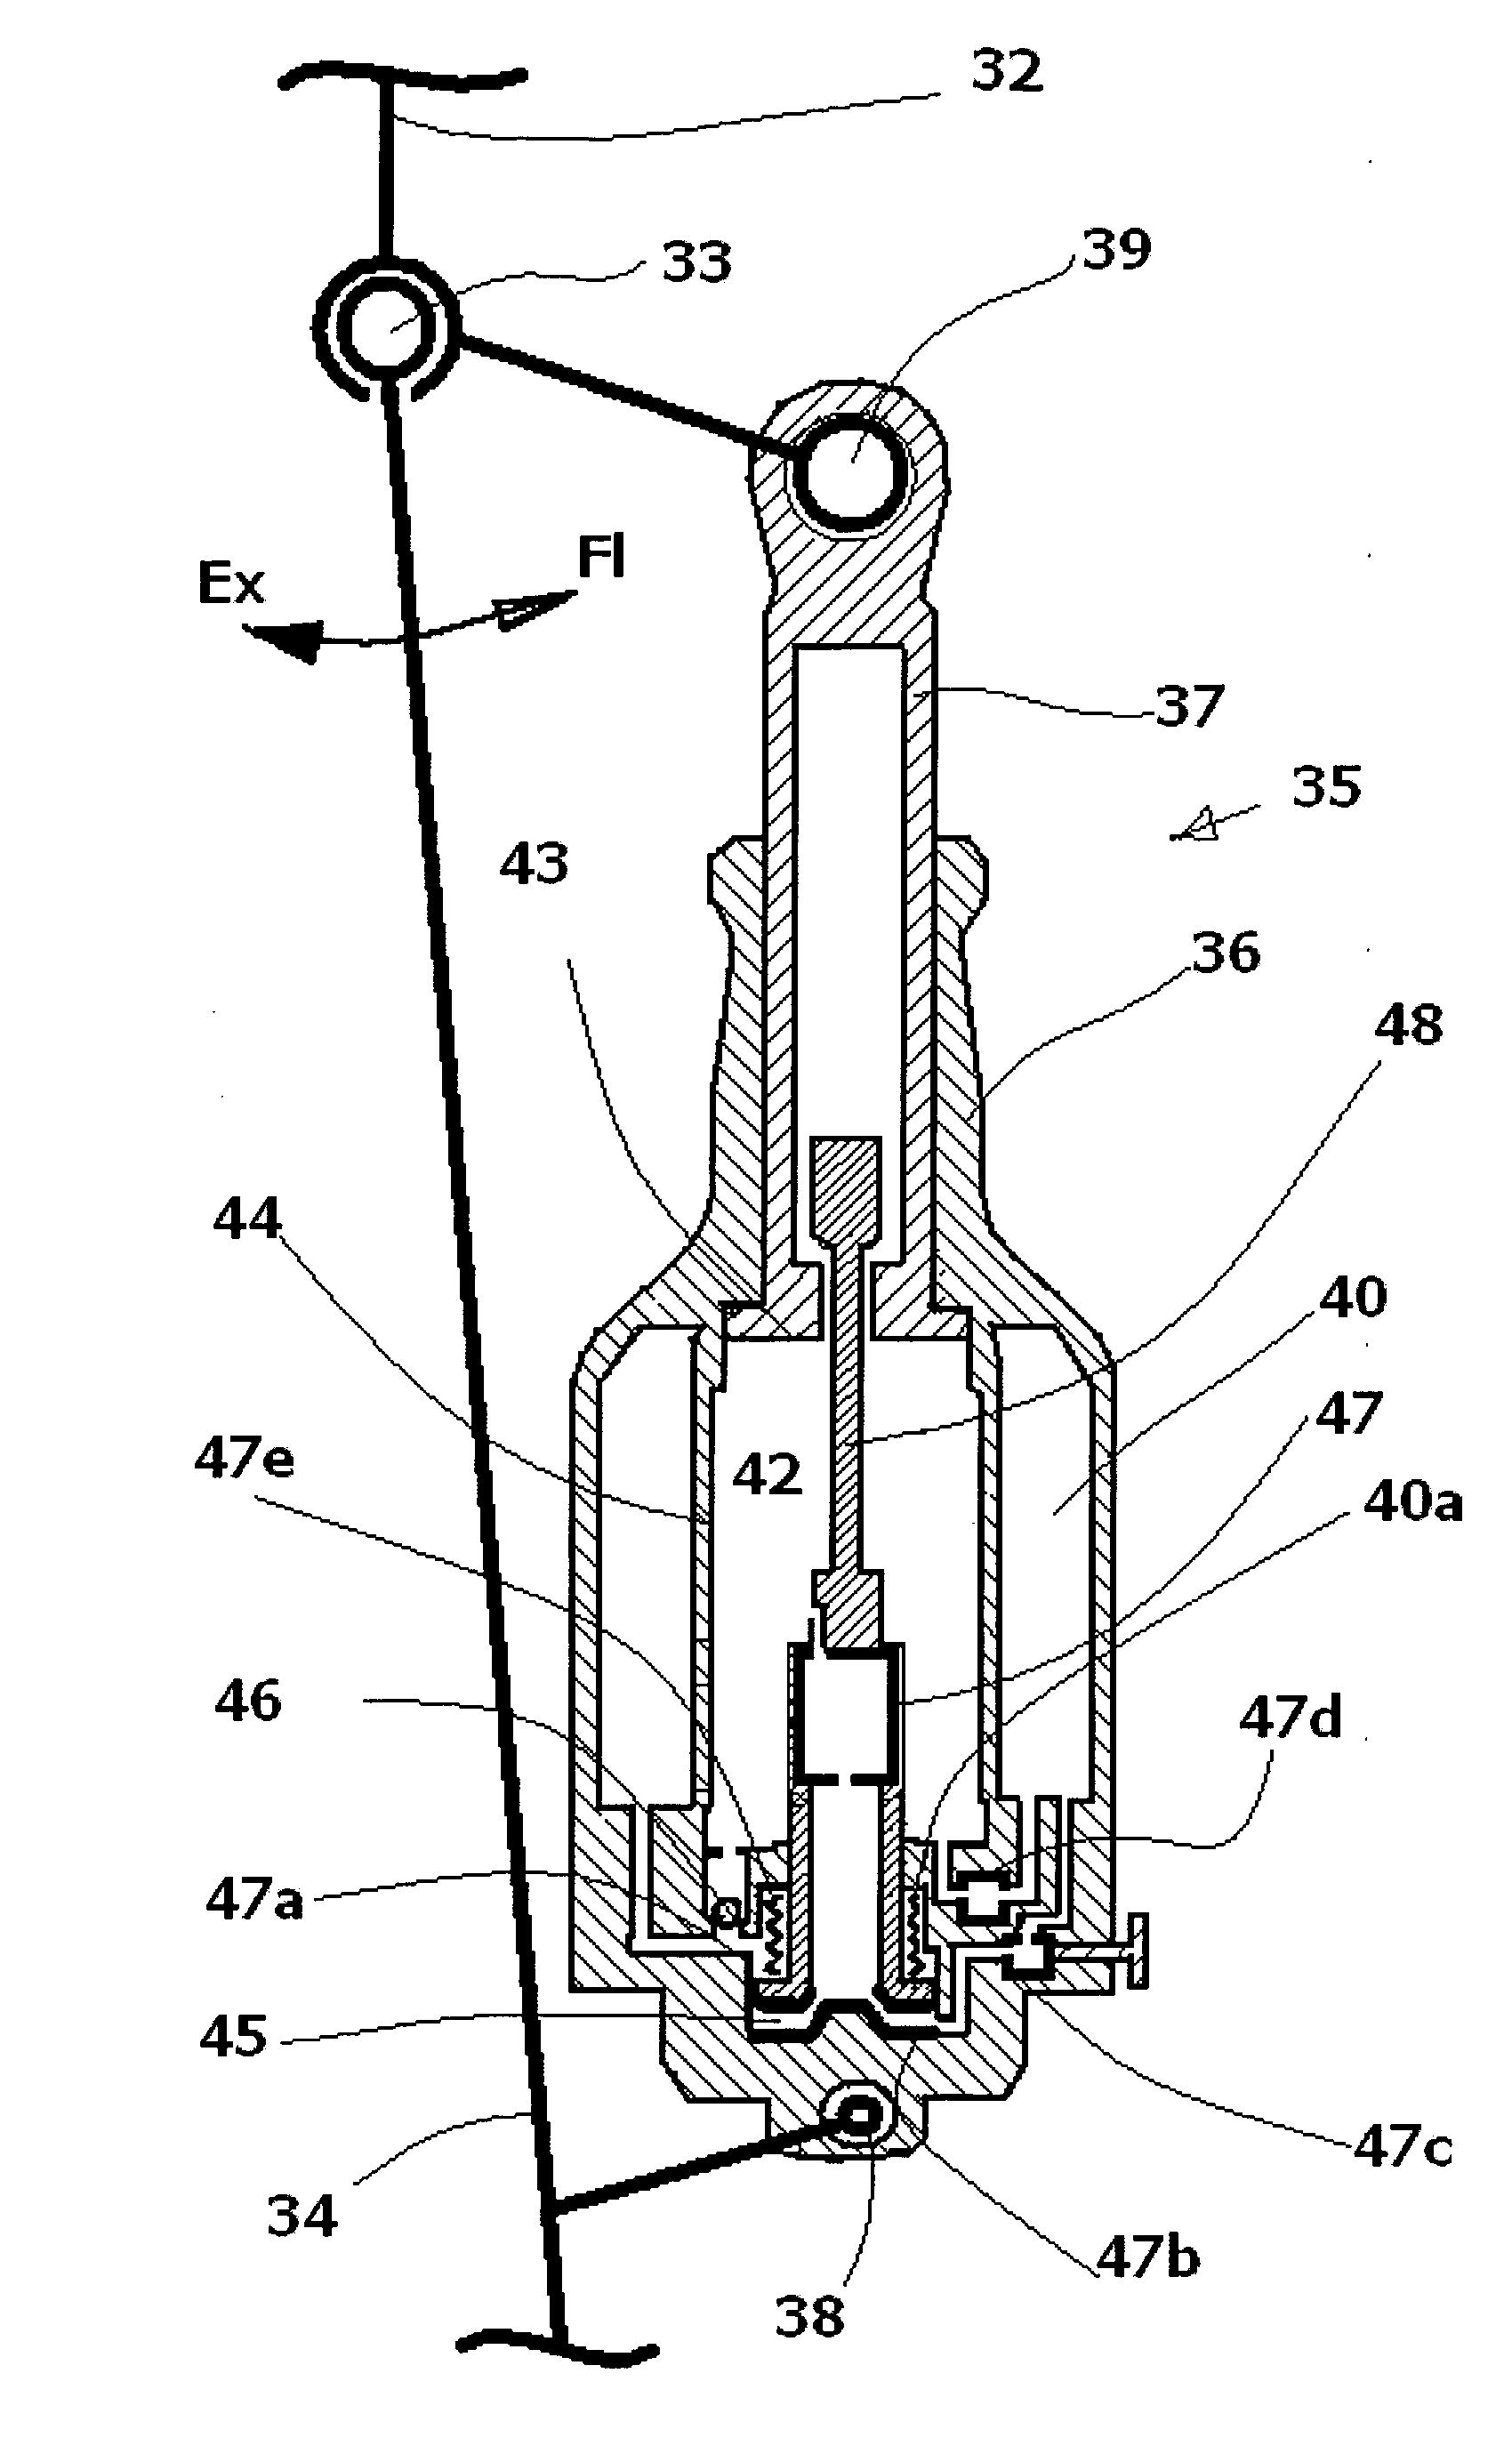 Hydraulic prosthetic joint